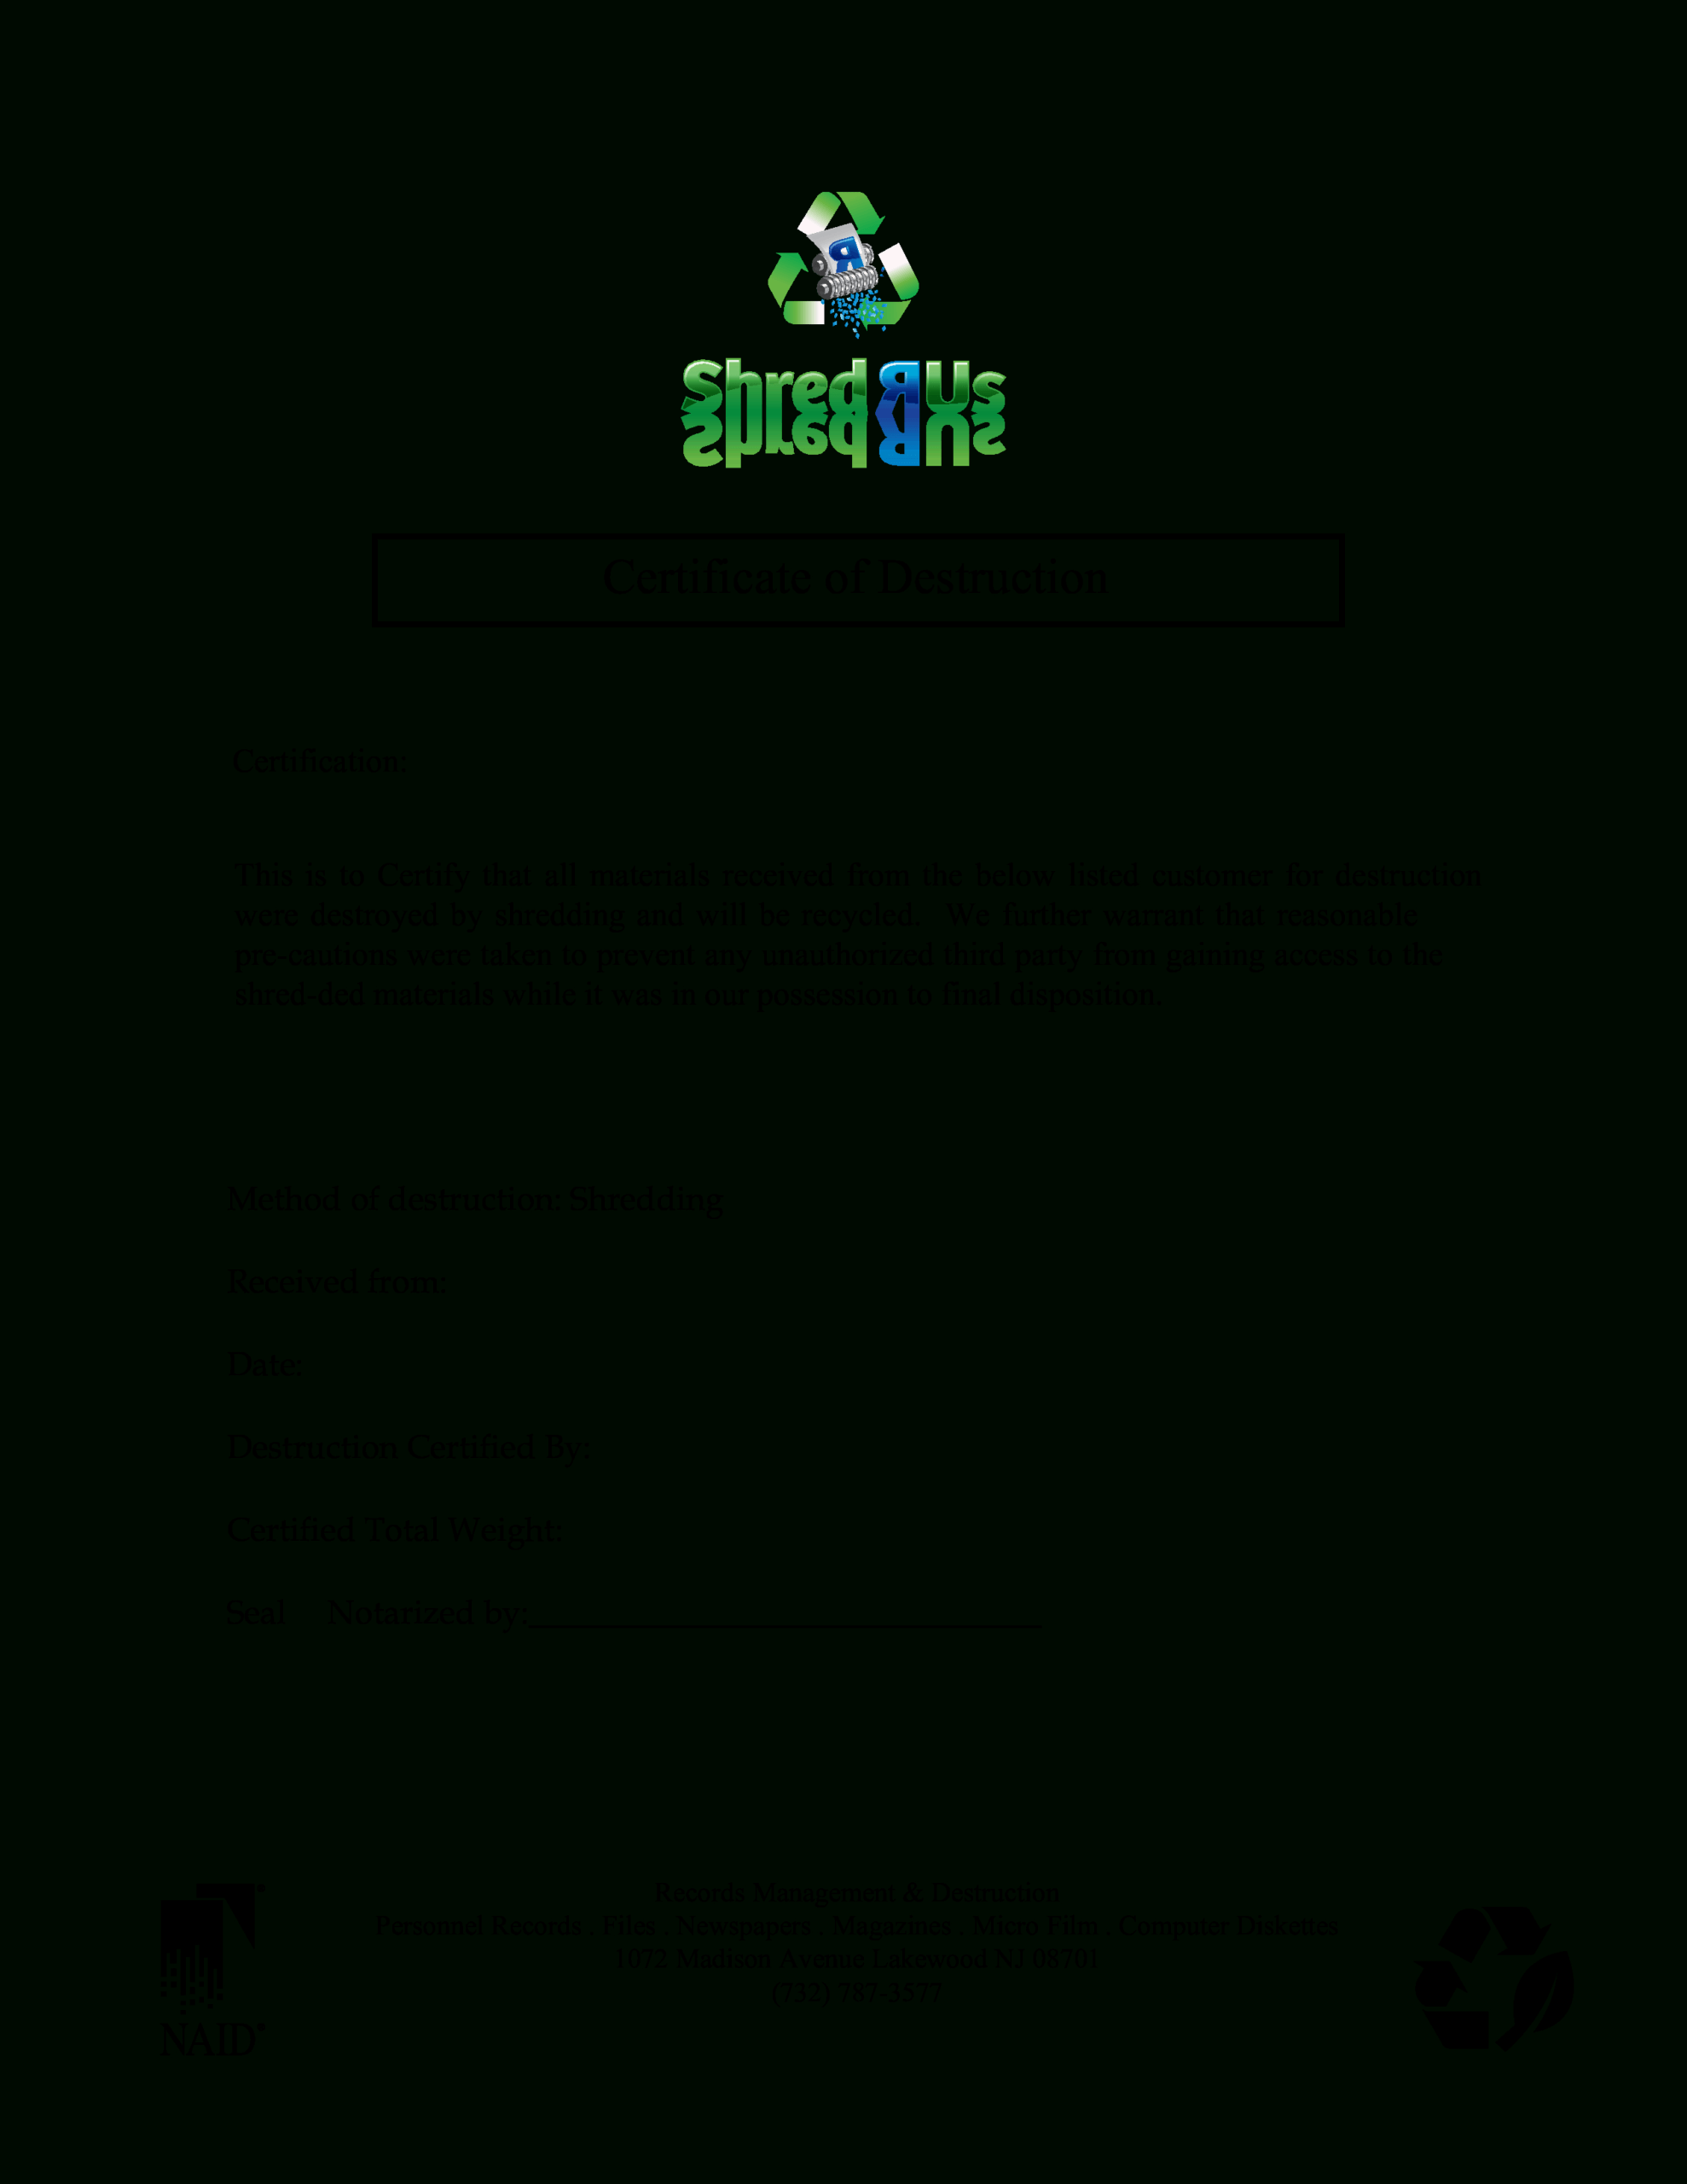 Simple Certificate Of Destruction | Templates At For Destruction Certificate Template